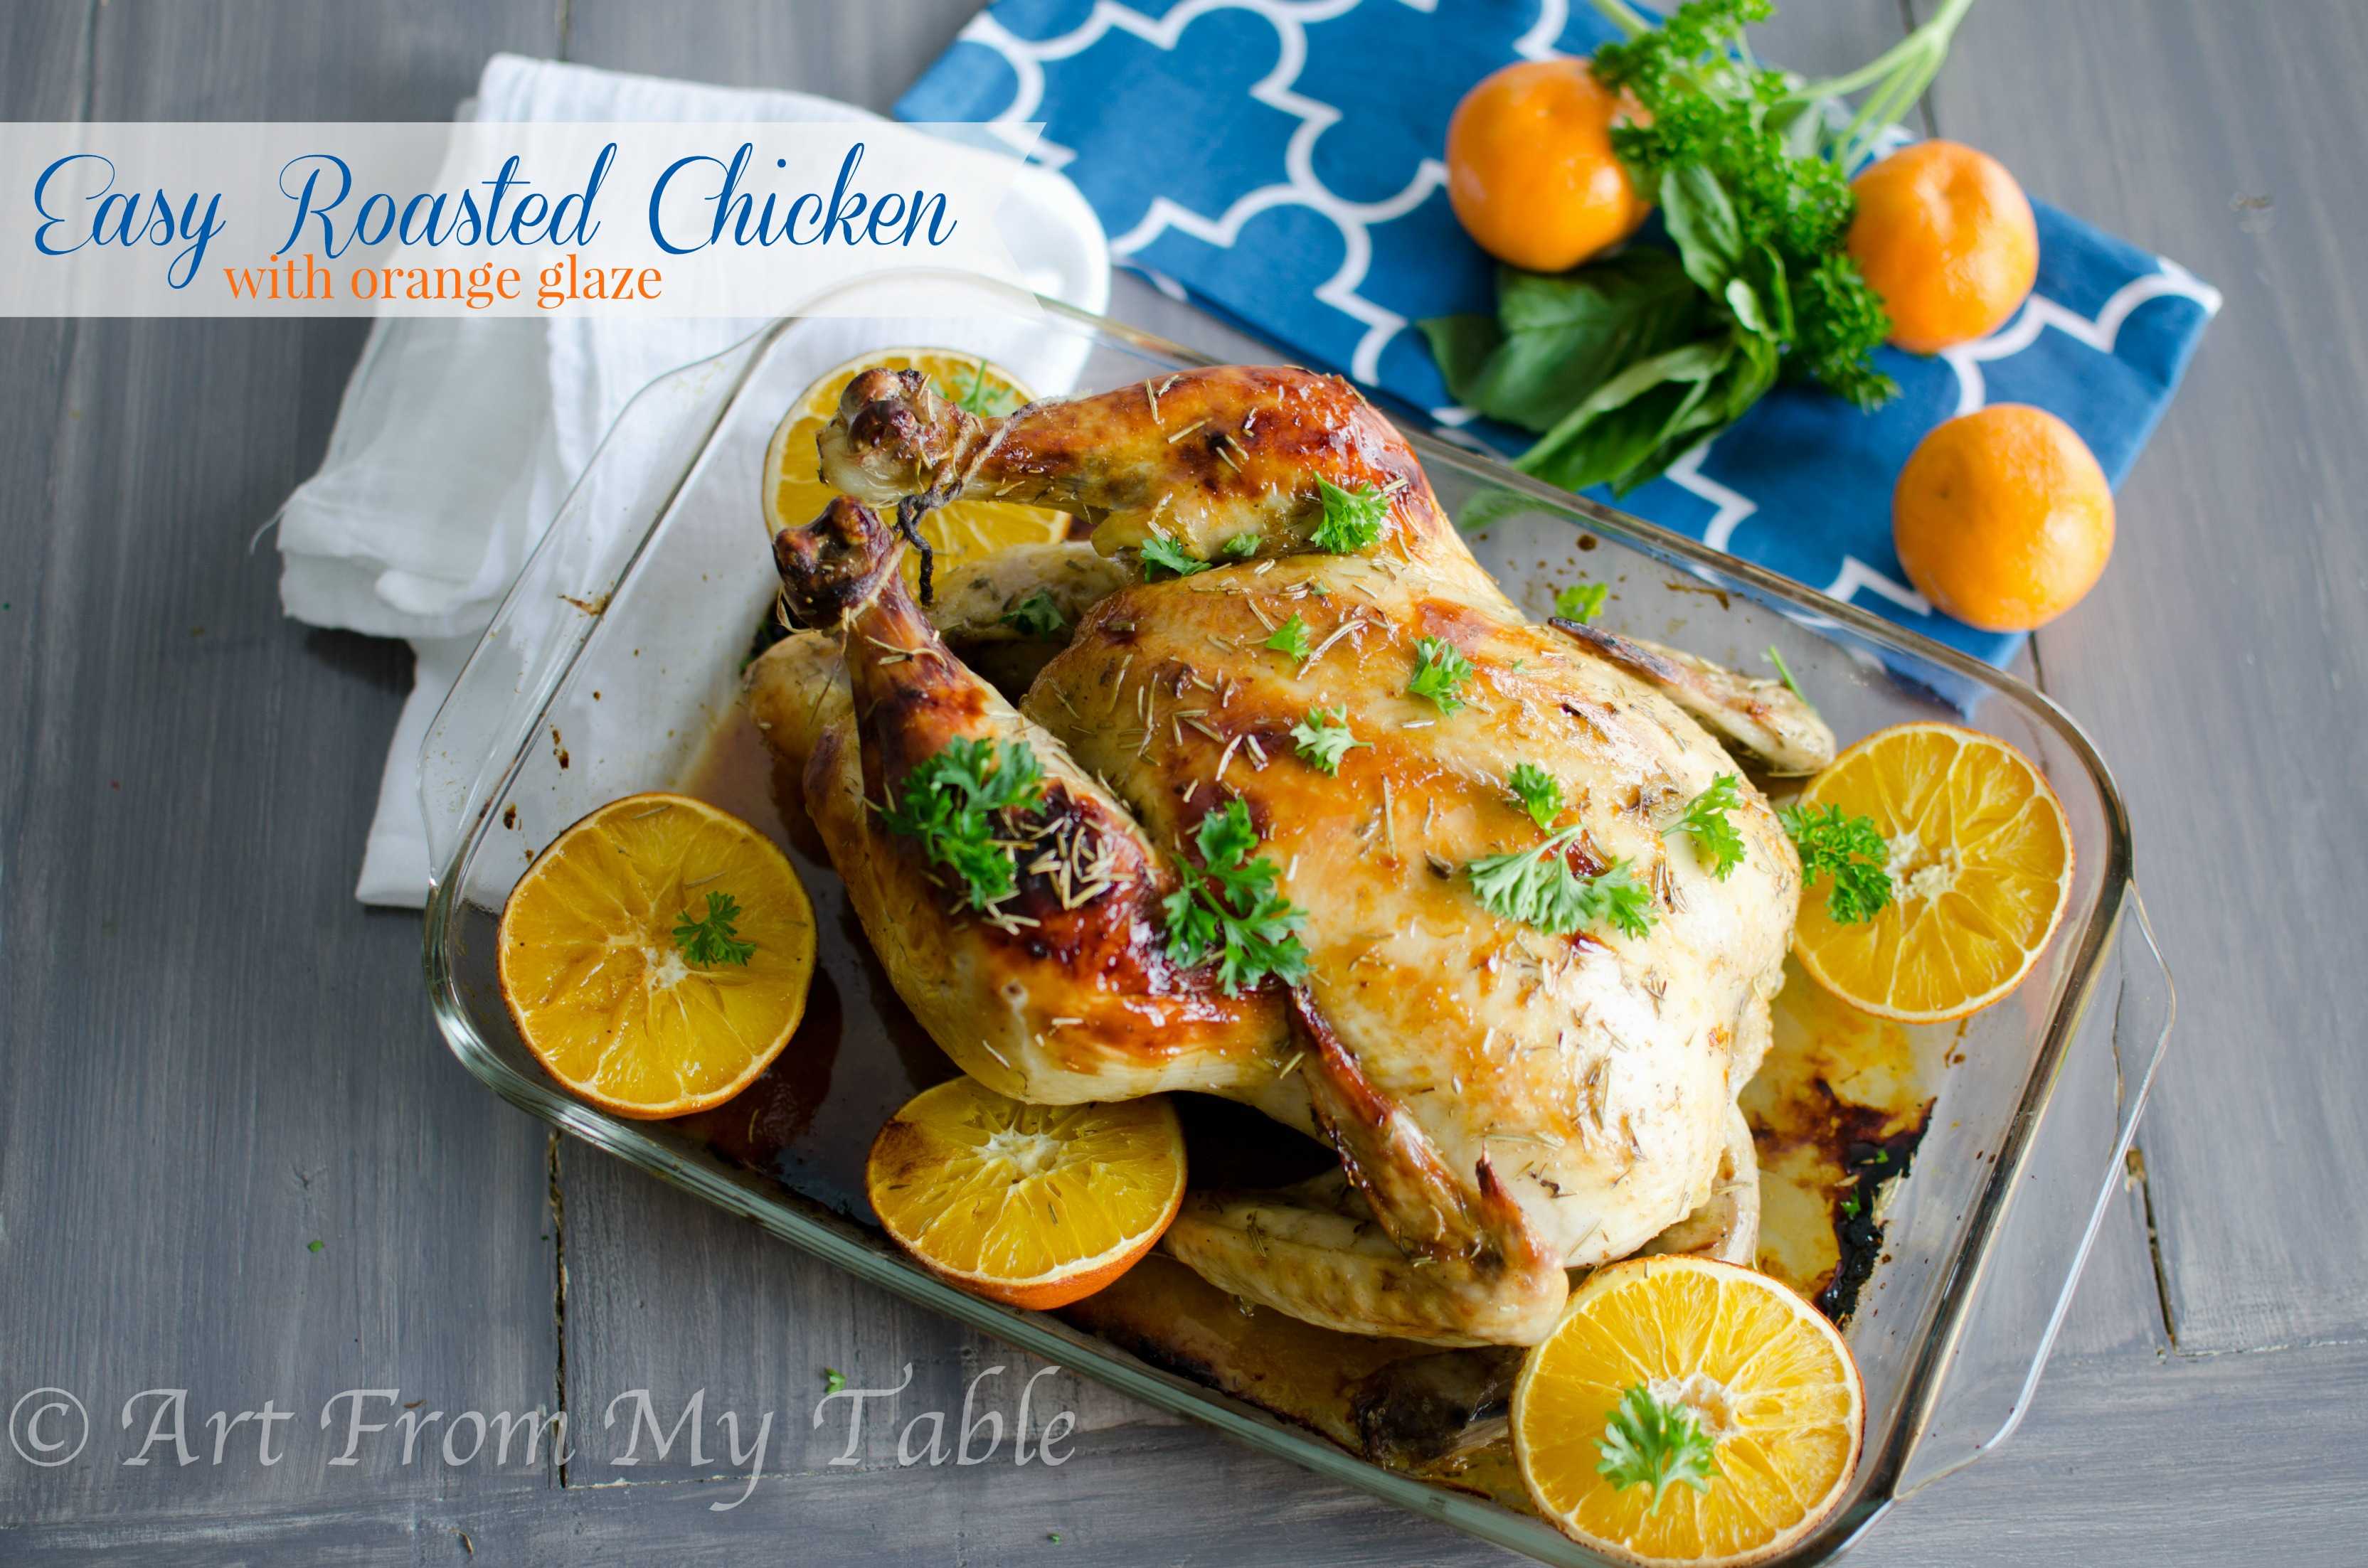 Whole roasted chicken with orange glaze in a baking dish surrounded with orange halves.